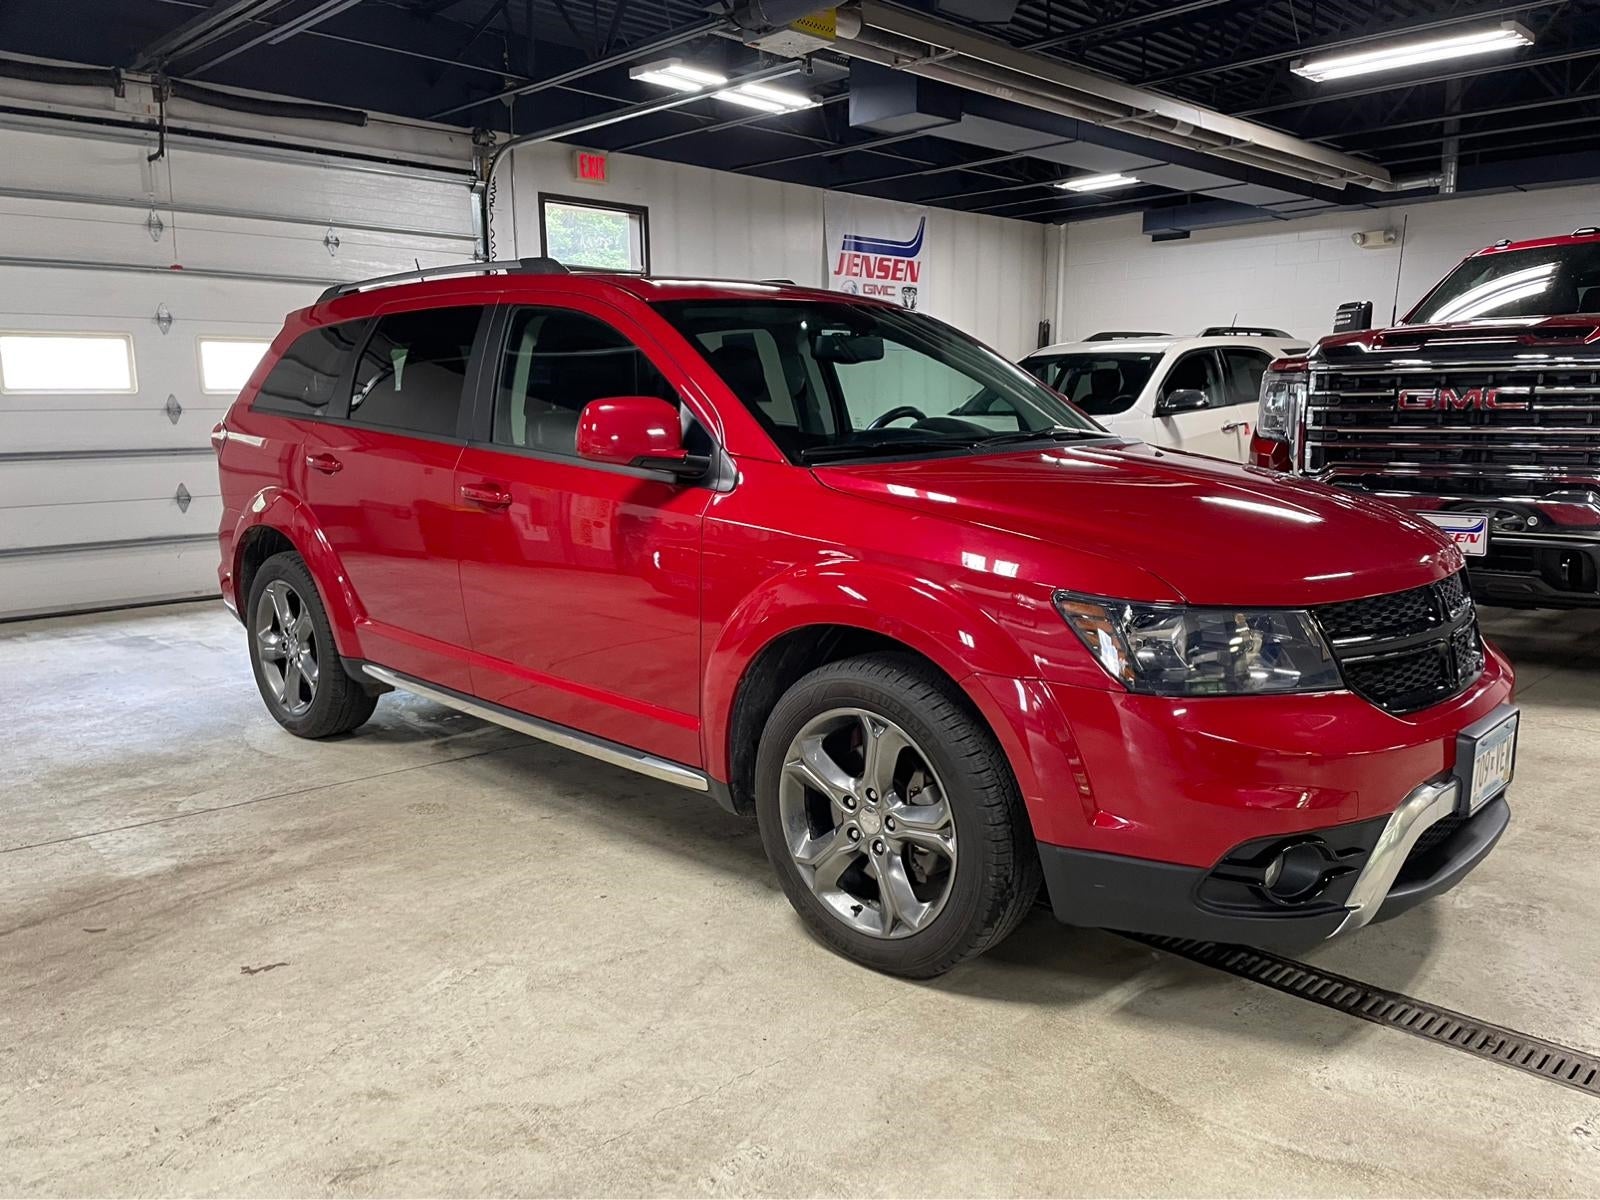 Used 2016 Dodge Journey CrossRoad Plus with VIN 3C4PDDGG9GT248113 for sale in New Ulm, Minnesota